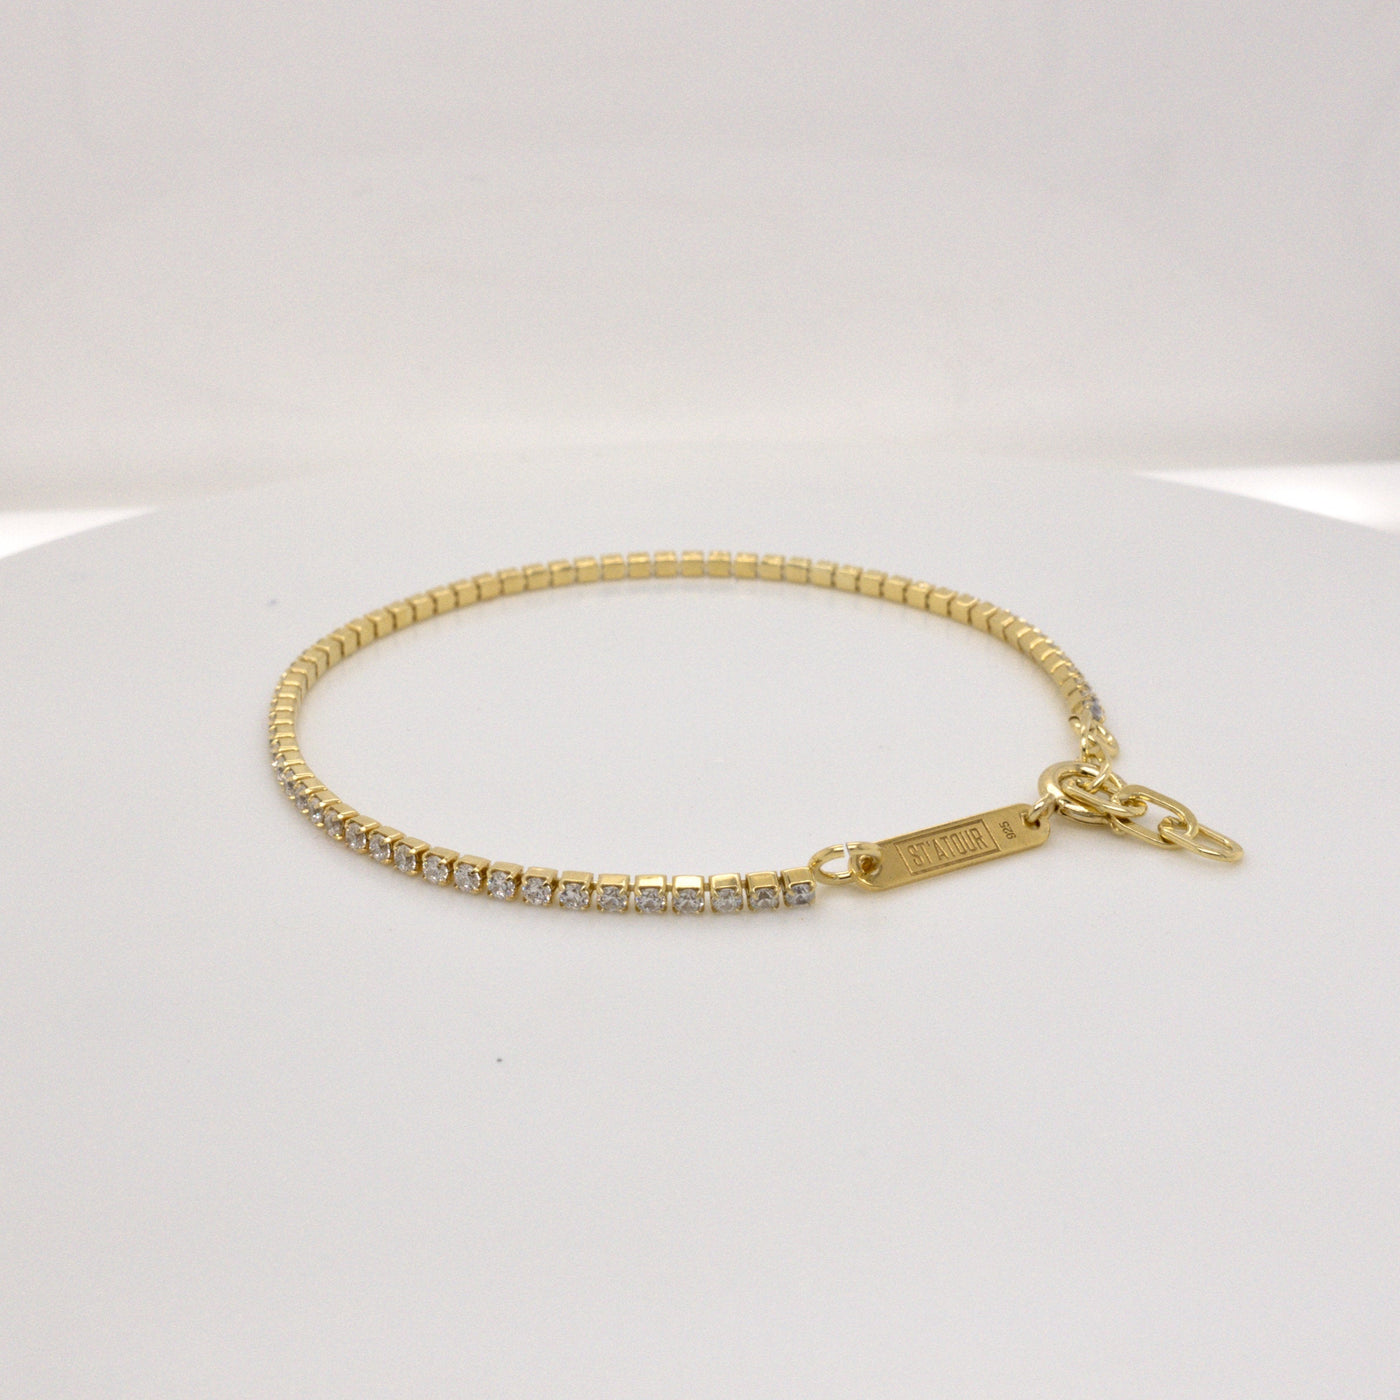 LETTICIA THIN – Armband mit Strass // Silber, Gold oder Roségold